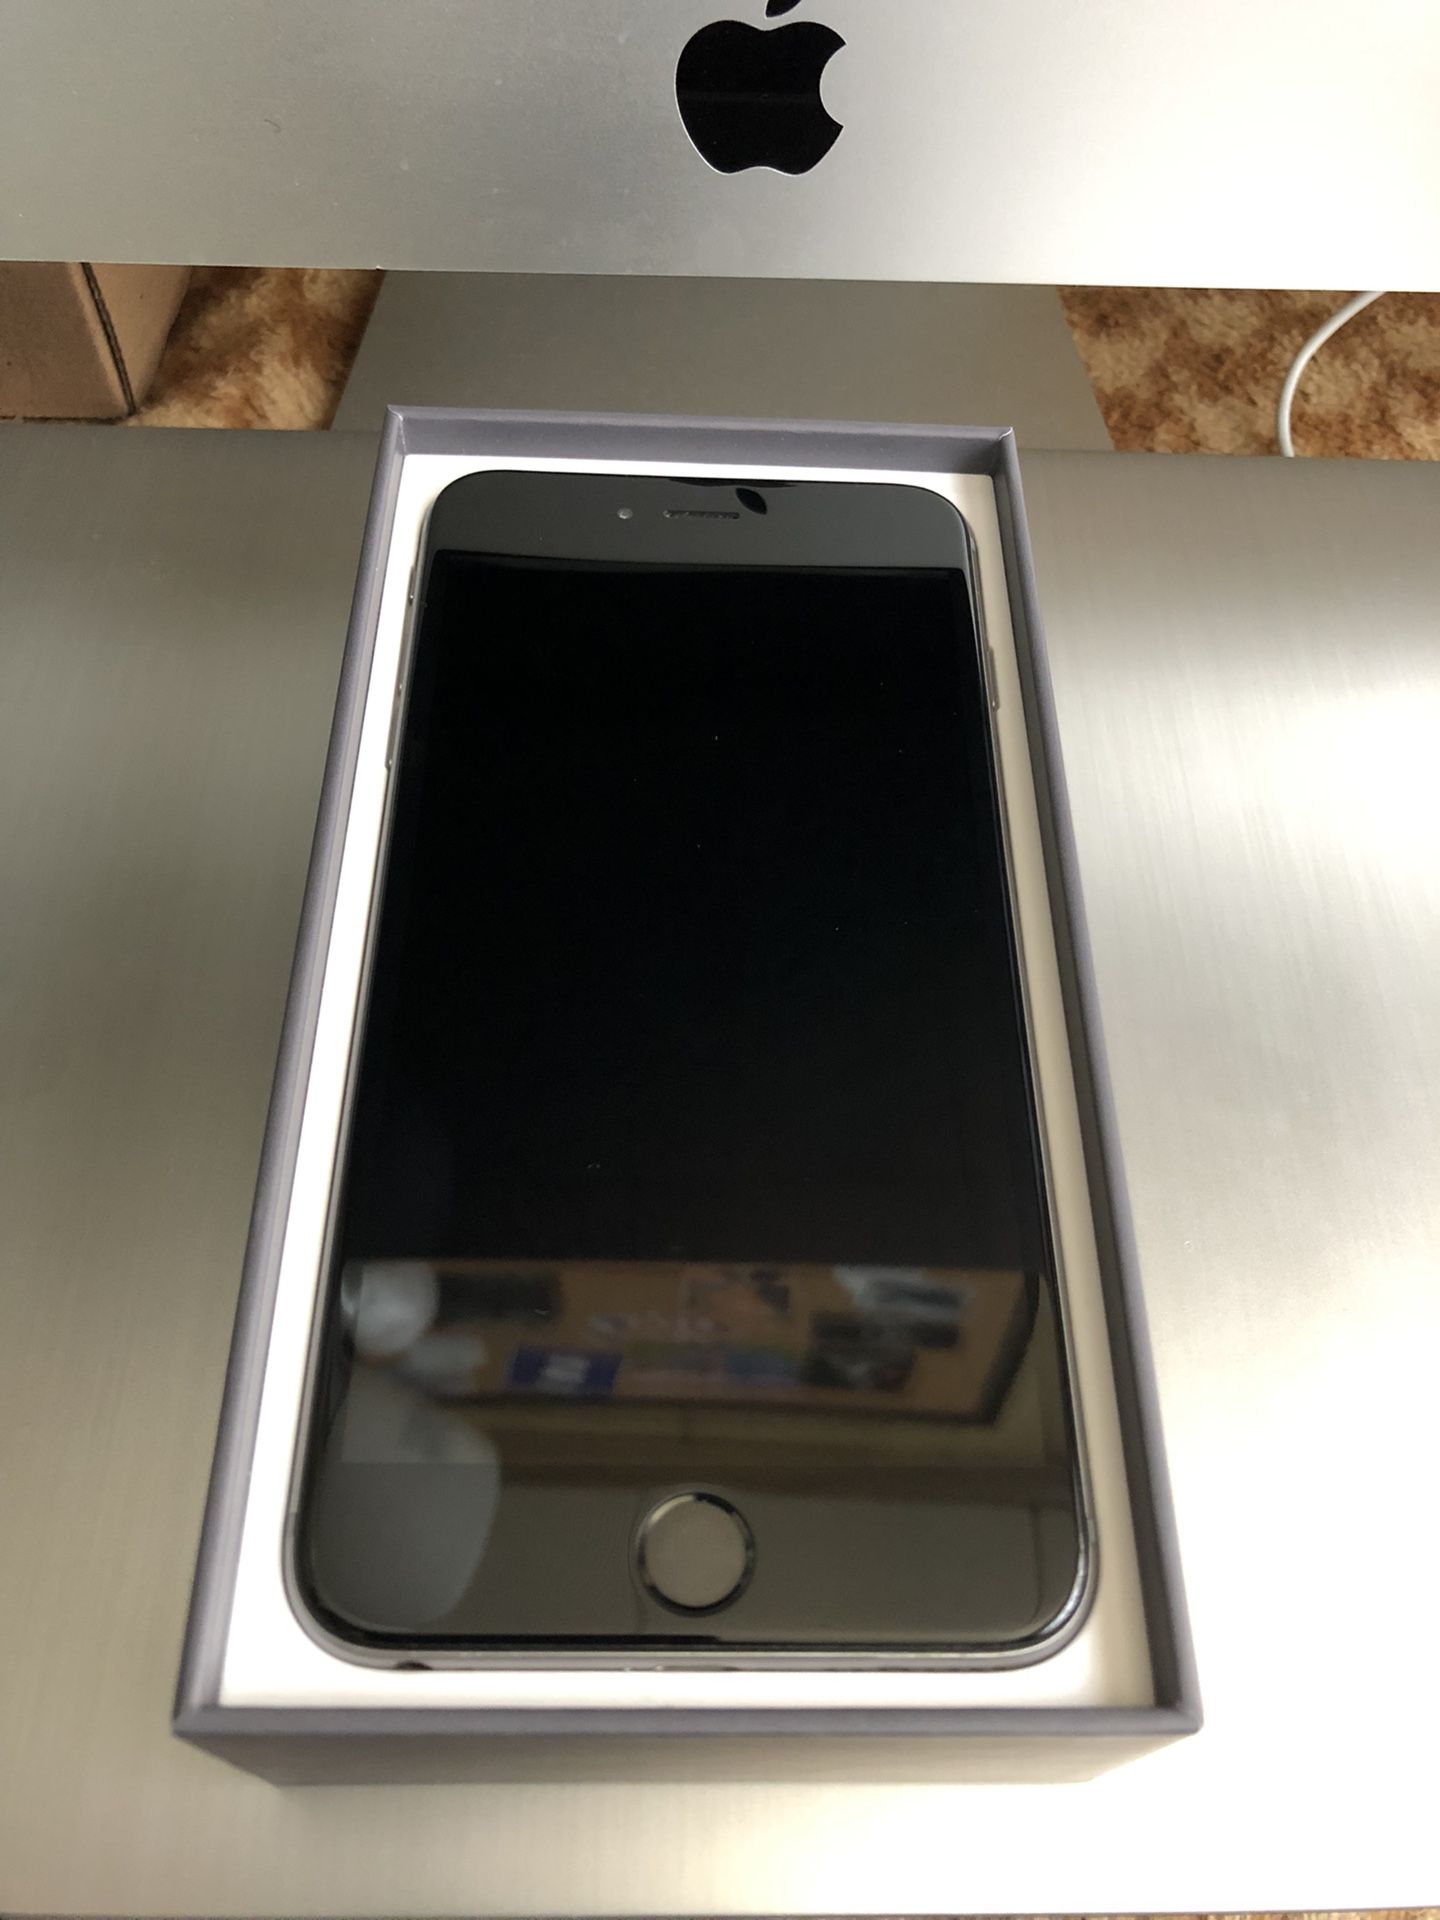 iphone 6plus touch screen doesnt work can be used for parts